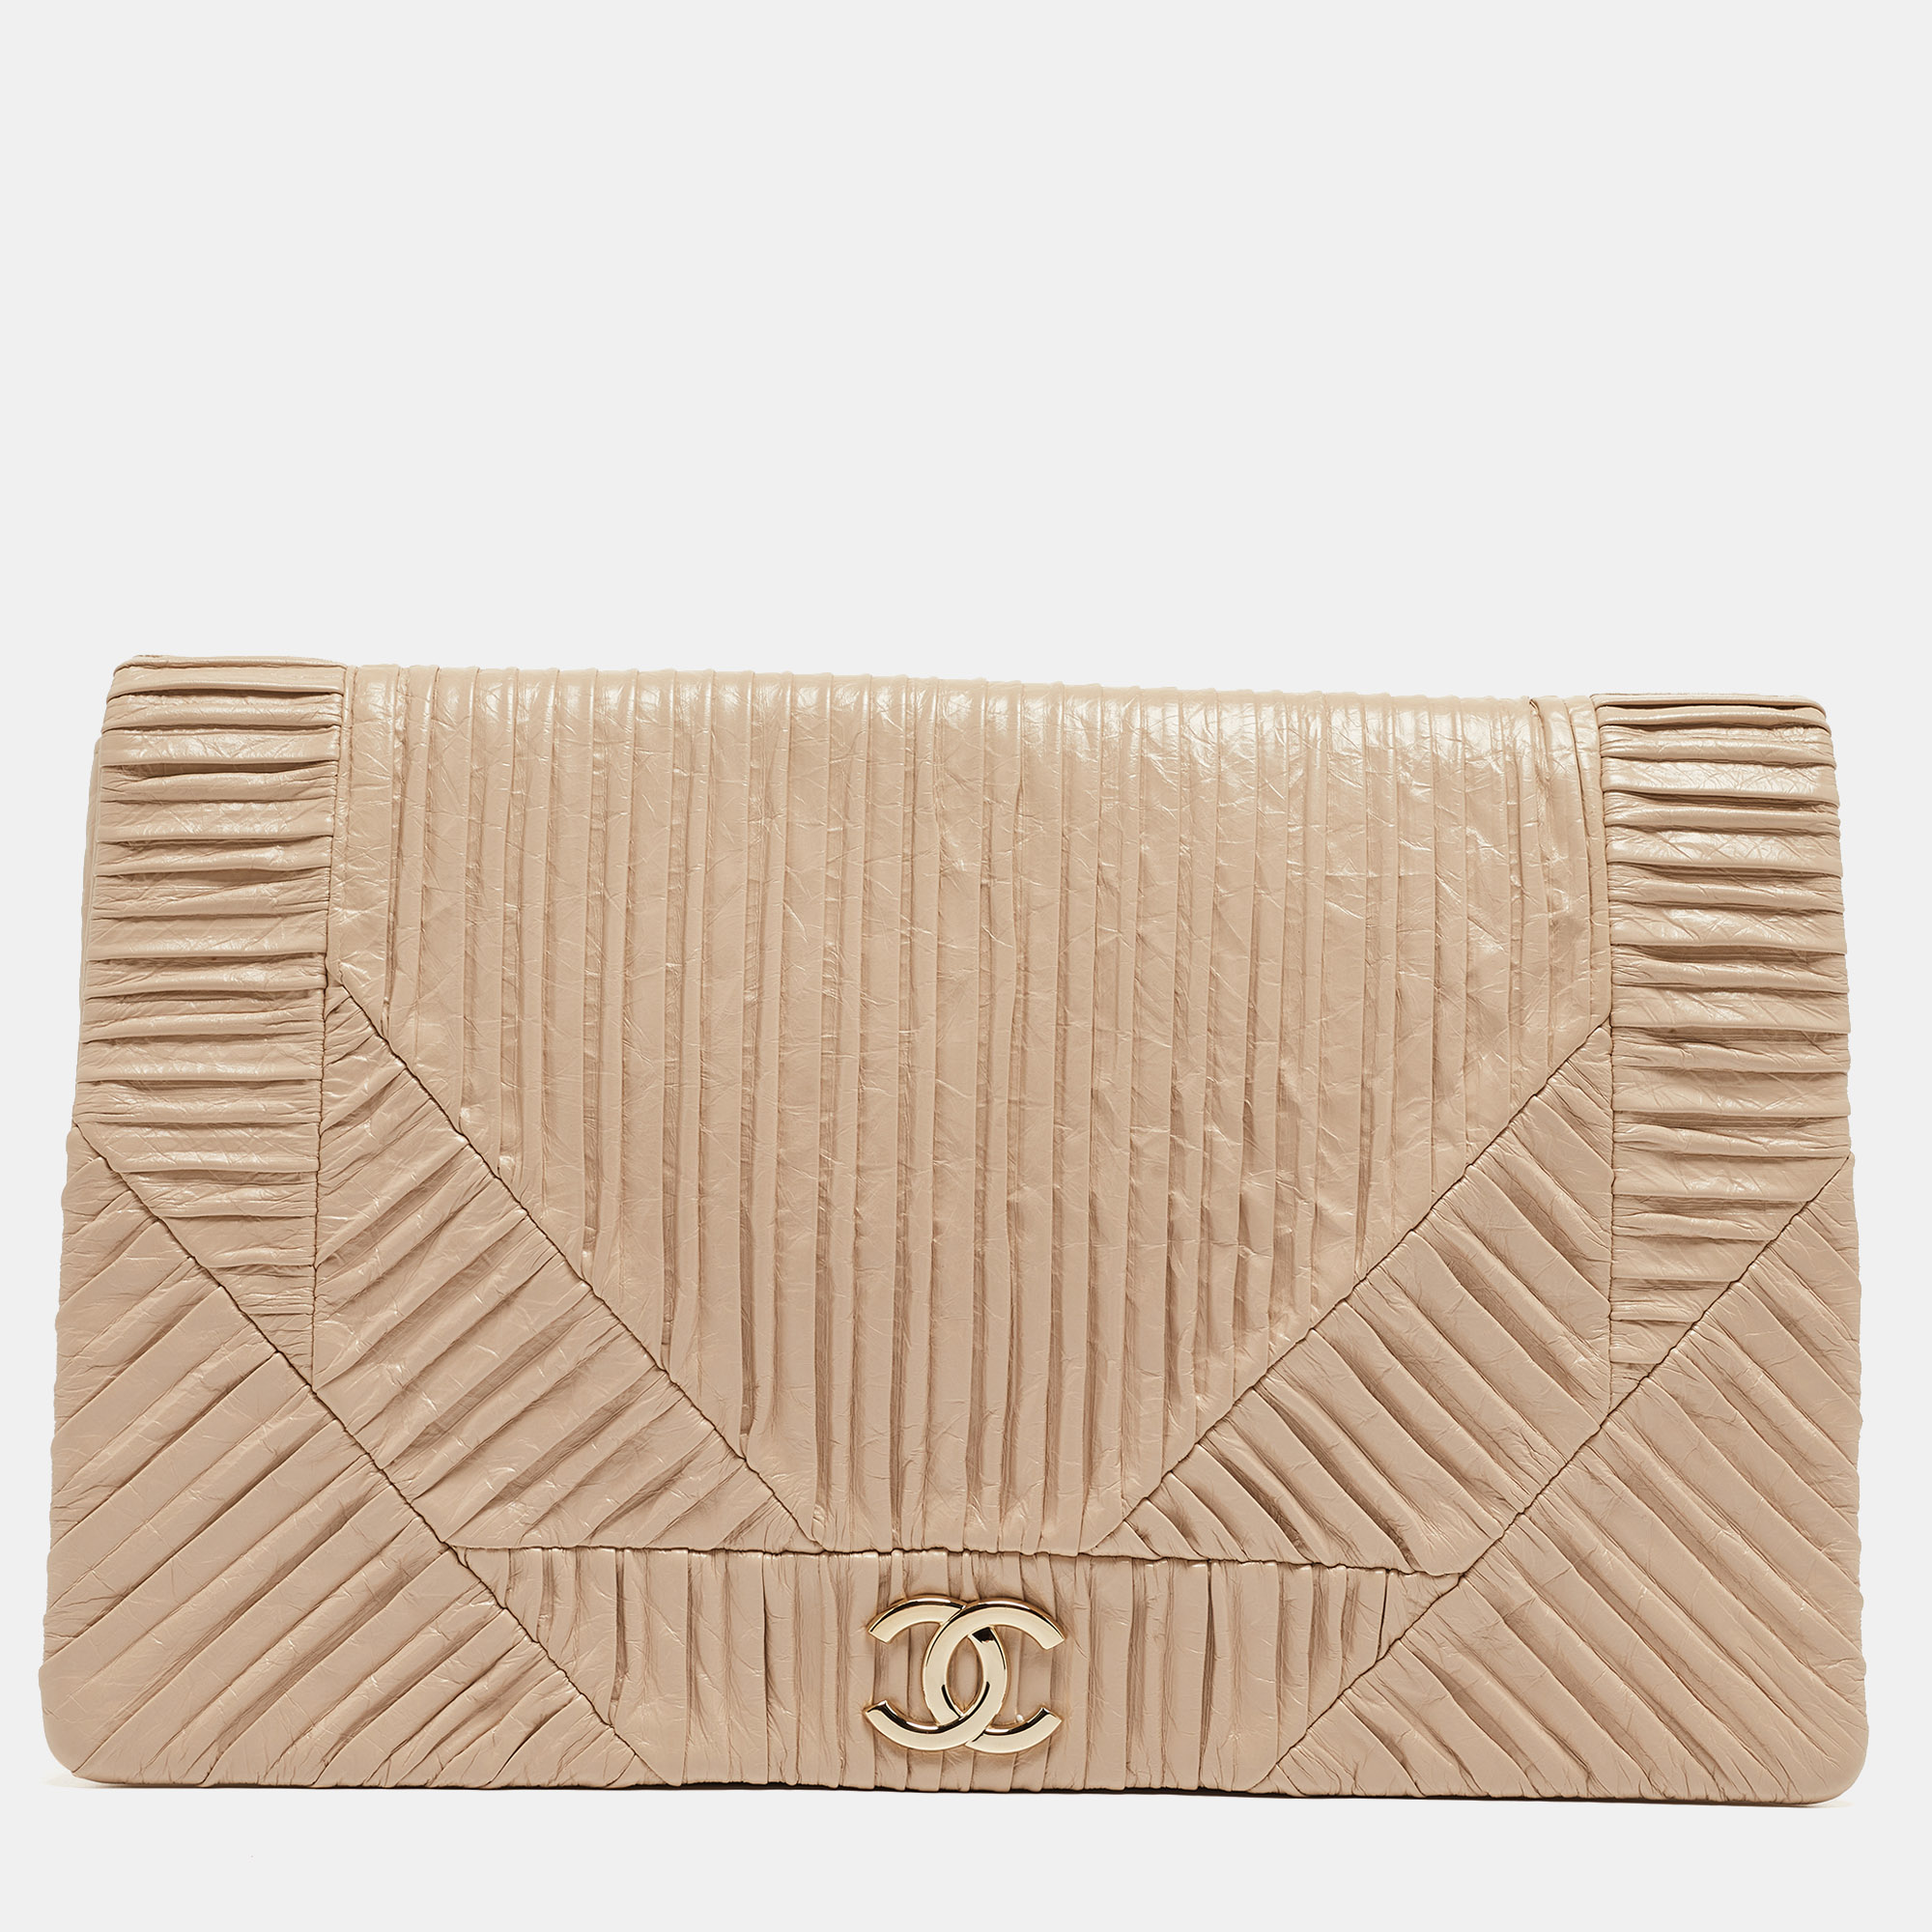 Pre-owned Chanel Beige Leather Coco Pleats Flap Clutch